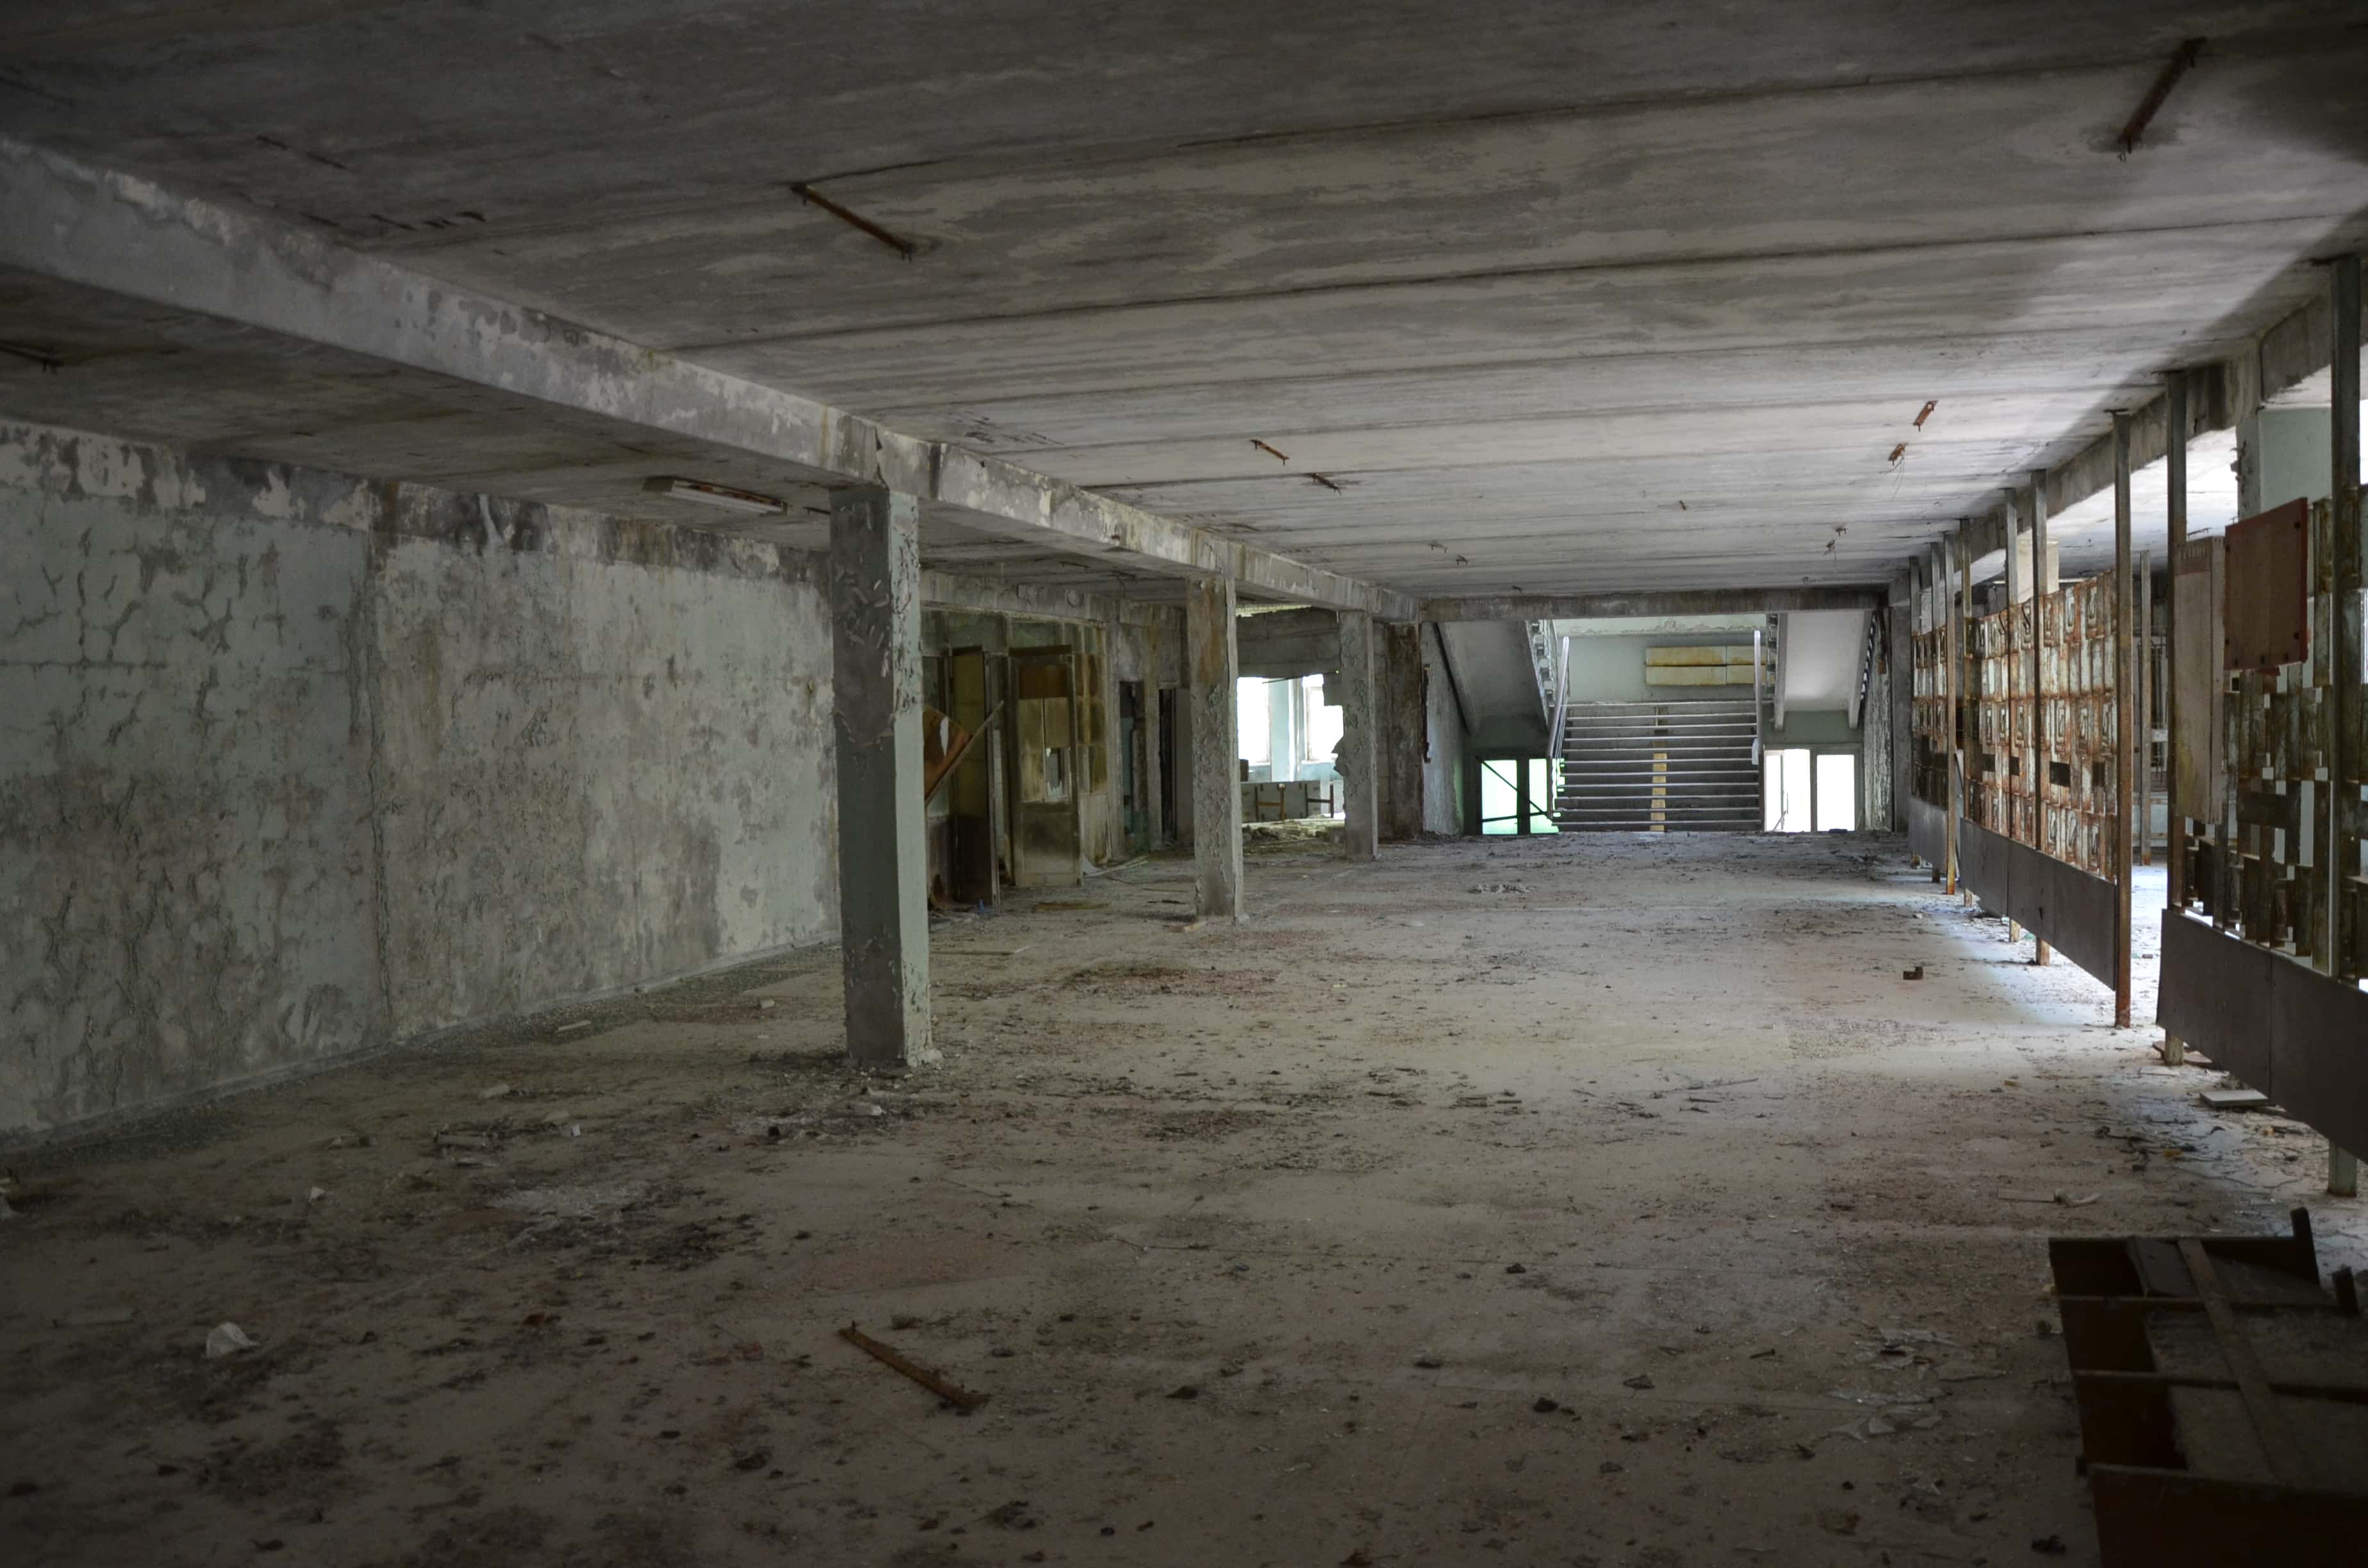 Lobby at Middle School #5 in Pripyat, Chernobyl Exclusion Zone, Ukraine